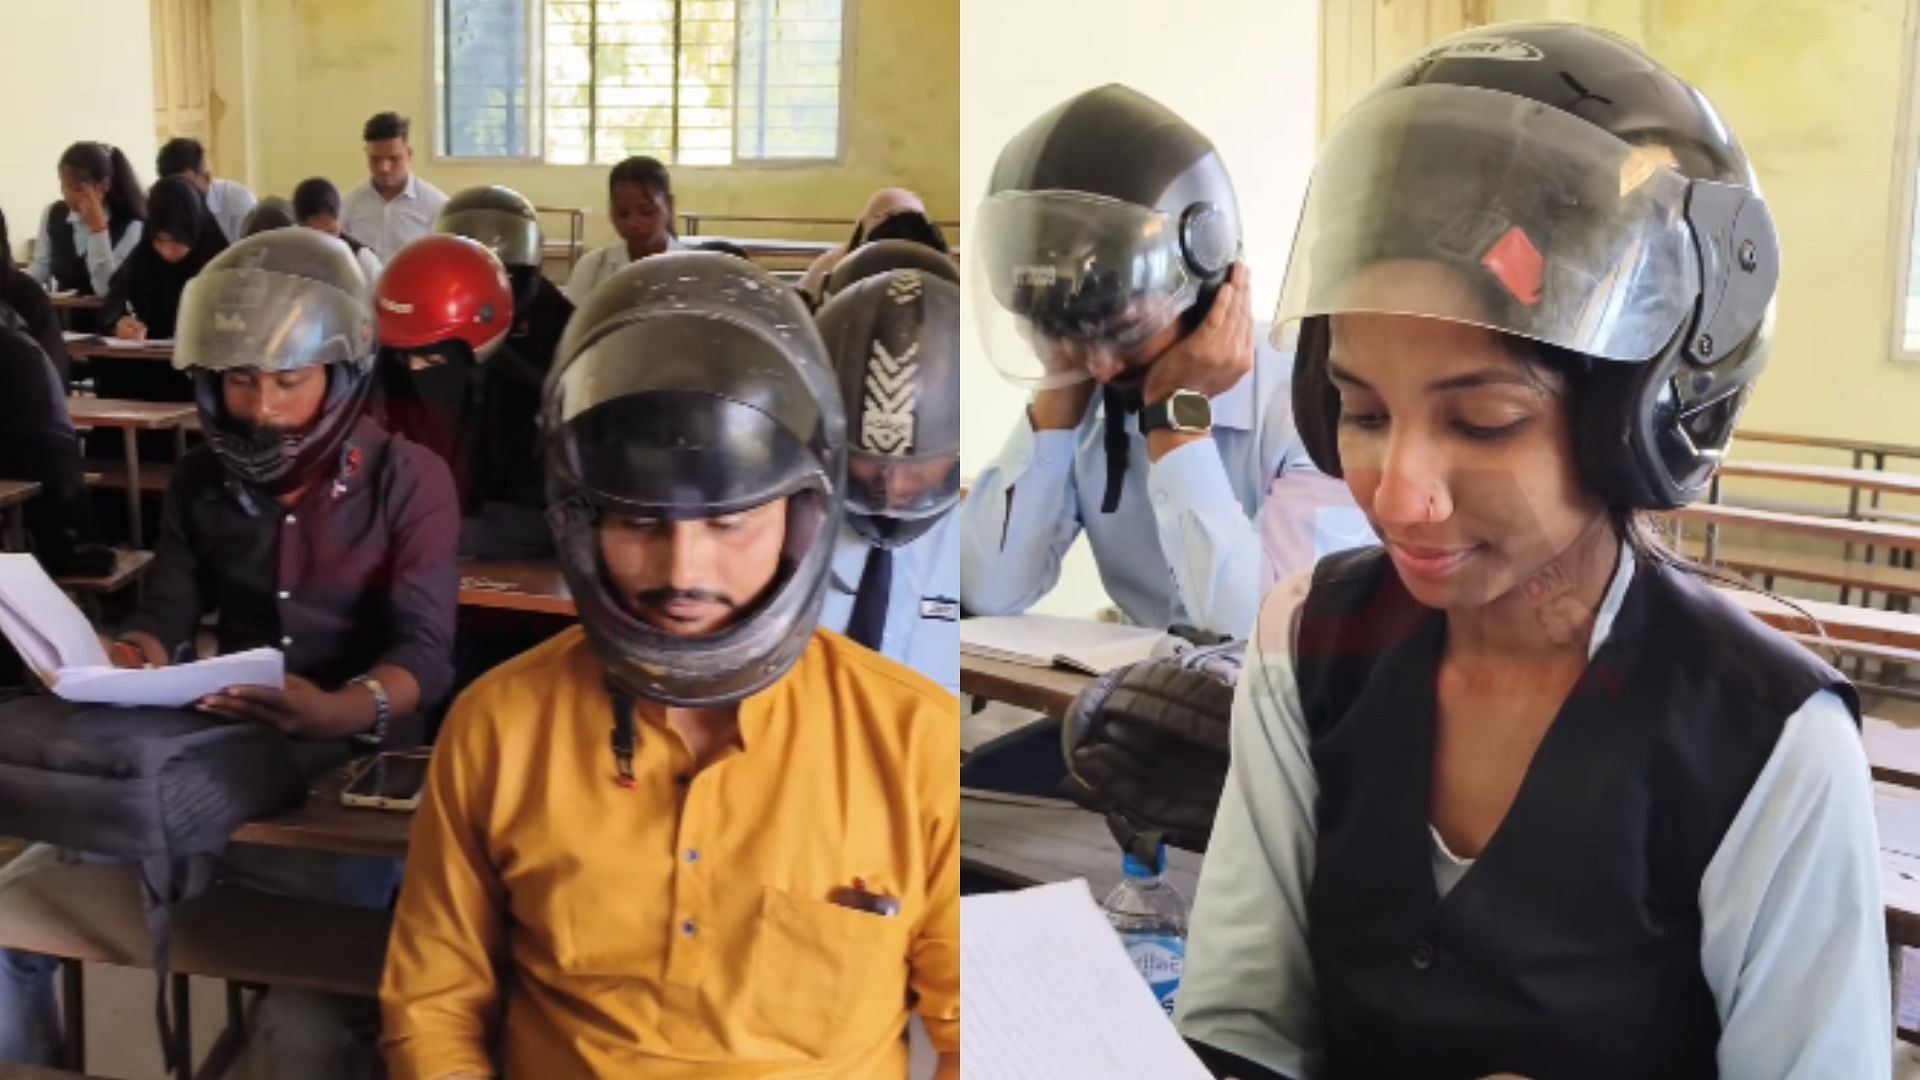 jamshedpur students wearing helmet inside classroom at government workers college